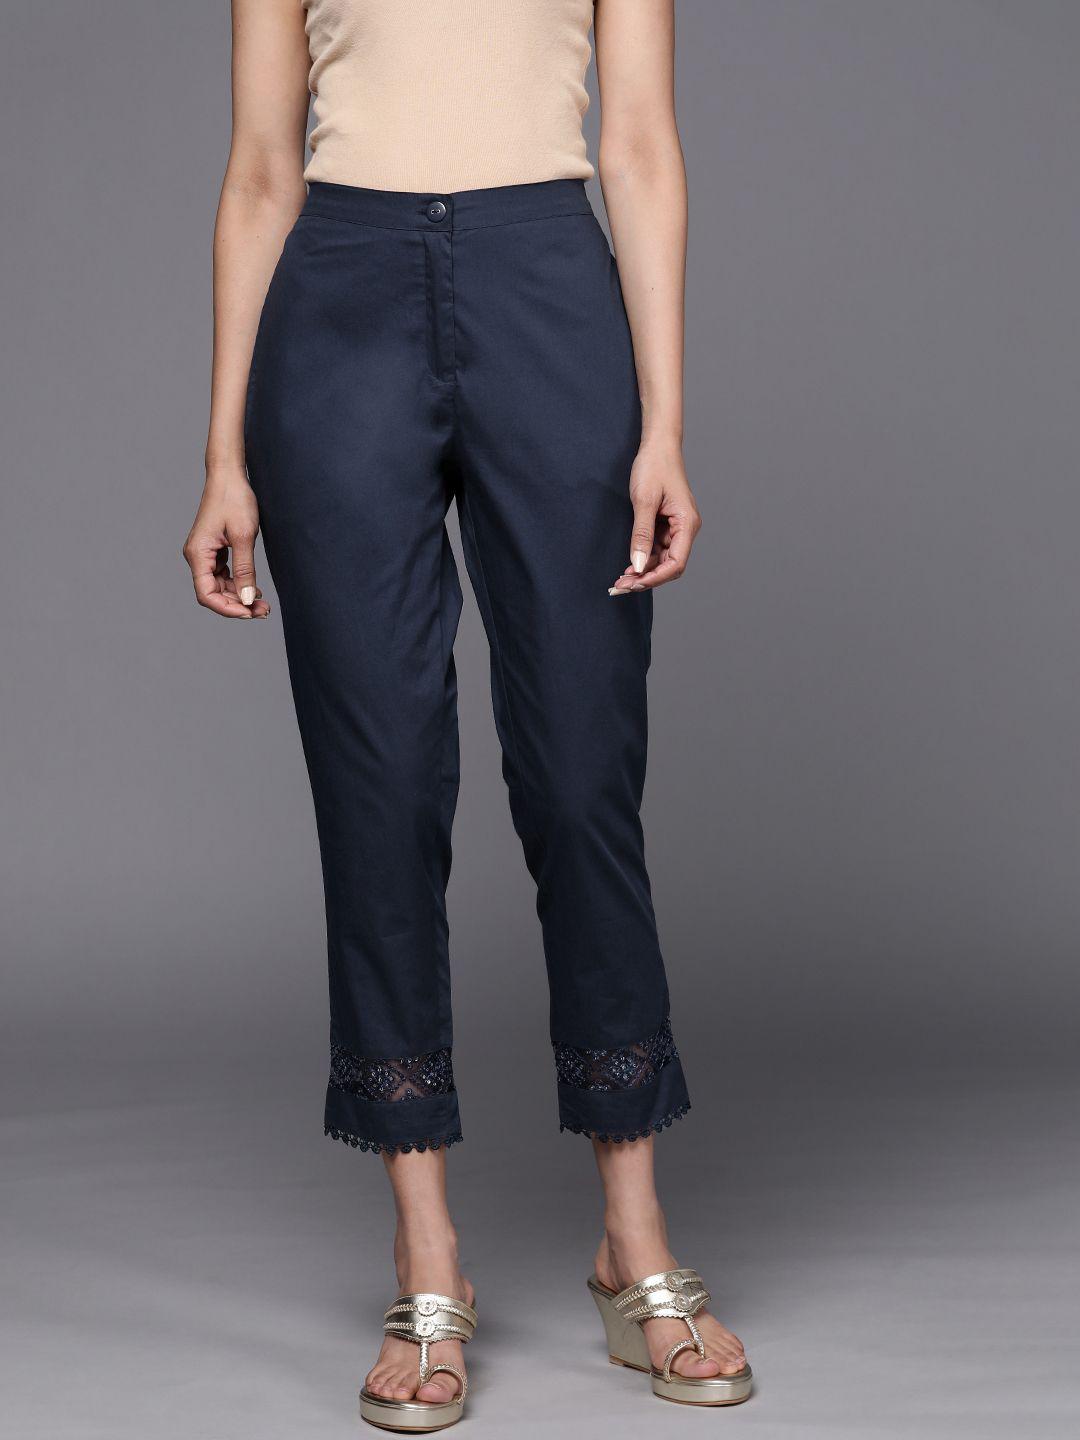 libas-women-navy-blue-pure-cotton-trousers-with-lace-details-at-hem